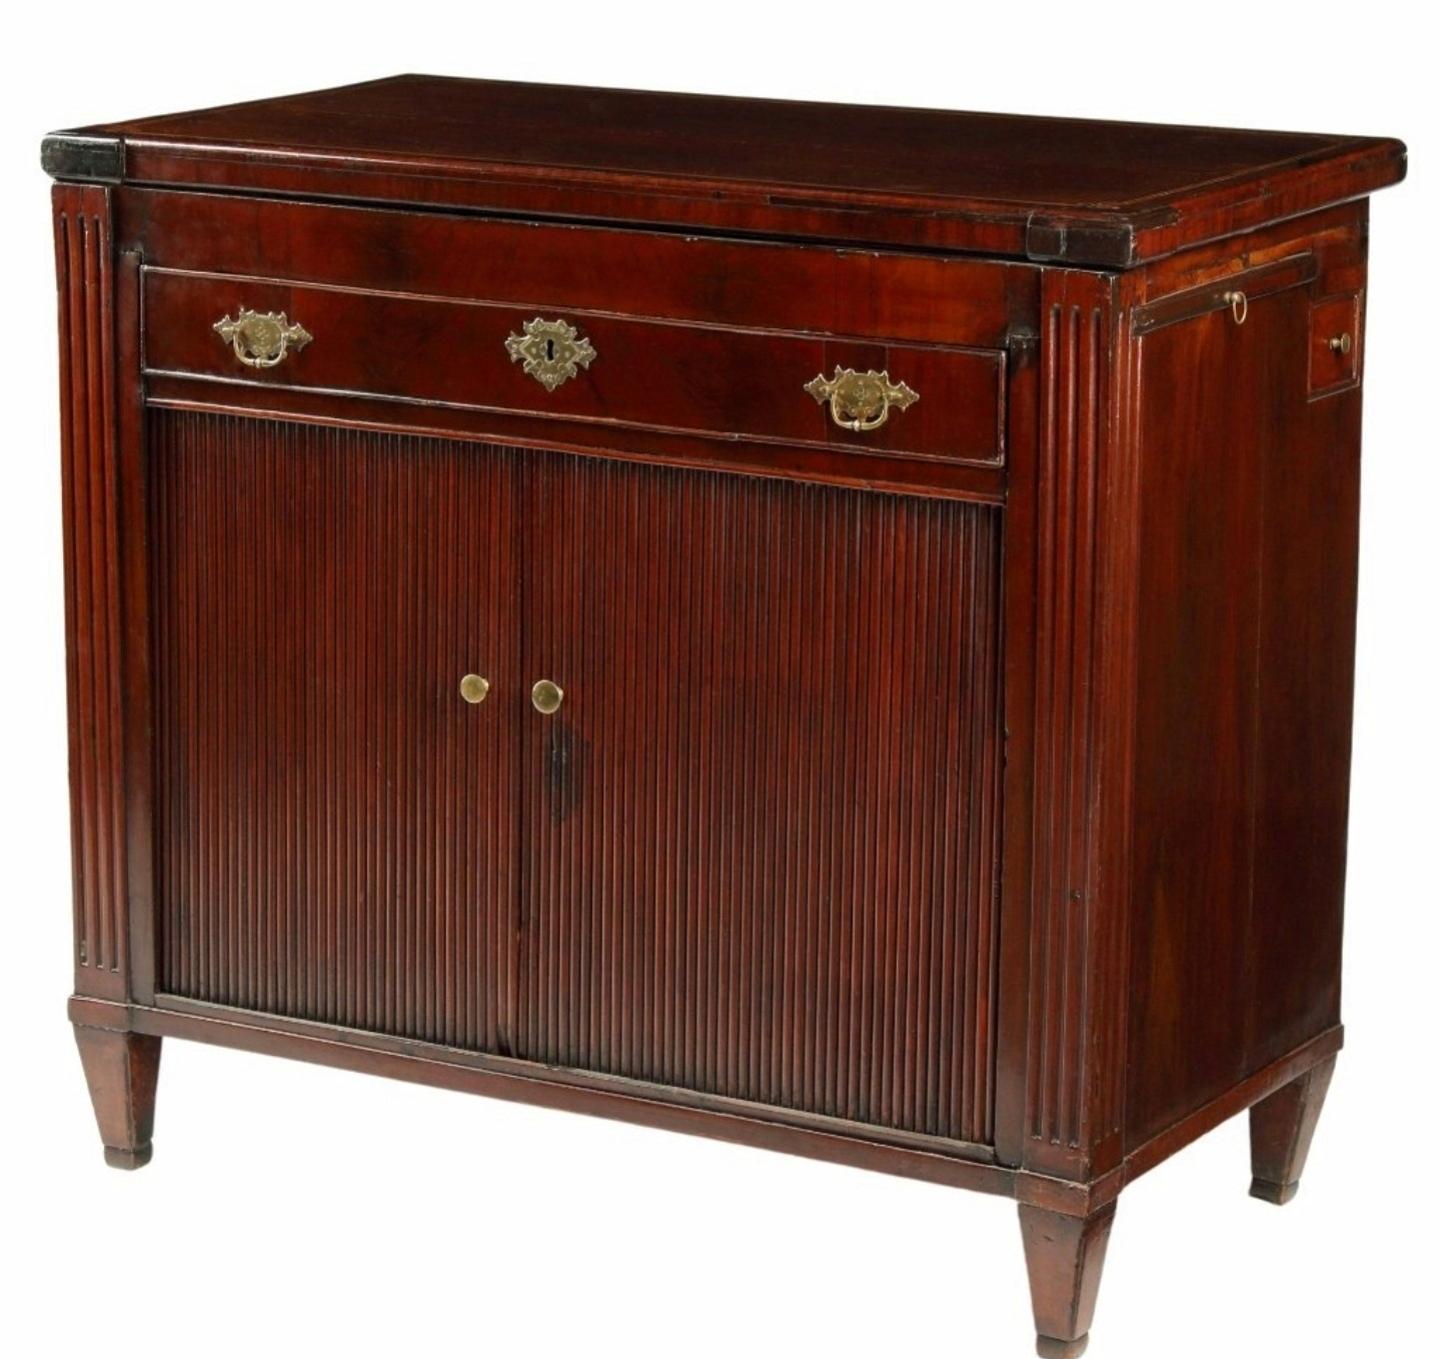 A scarce antique European, most likely Dutch, inlaid mahogany transformative buffet server. circa 1780

Hand-crafted in Continental Europe in the late 18th century, styled in period Louis XVI taste, featuring solid mahogany construction with